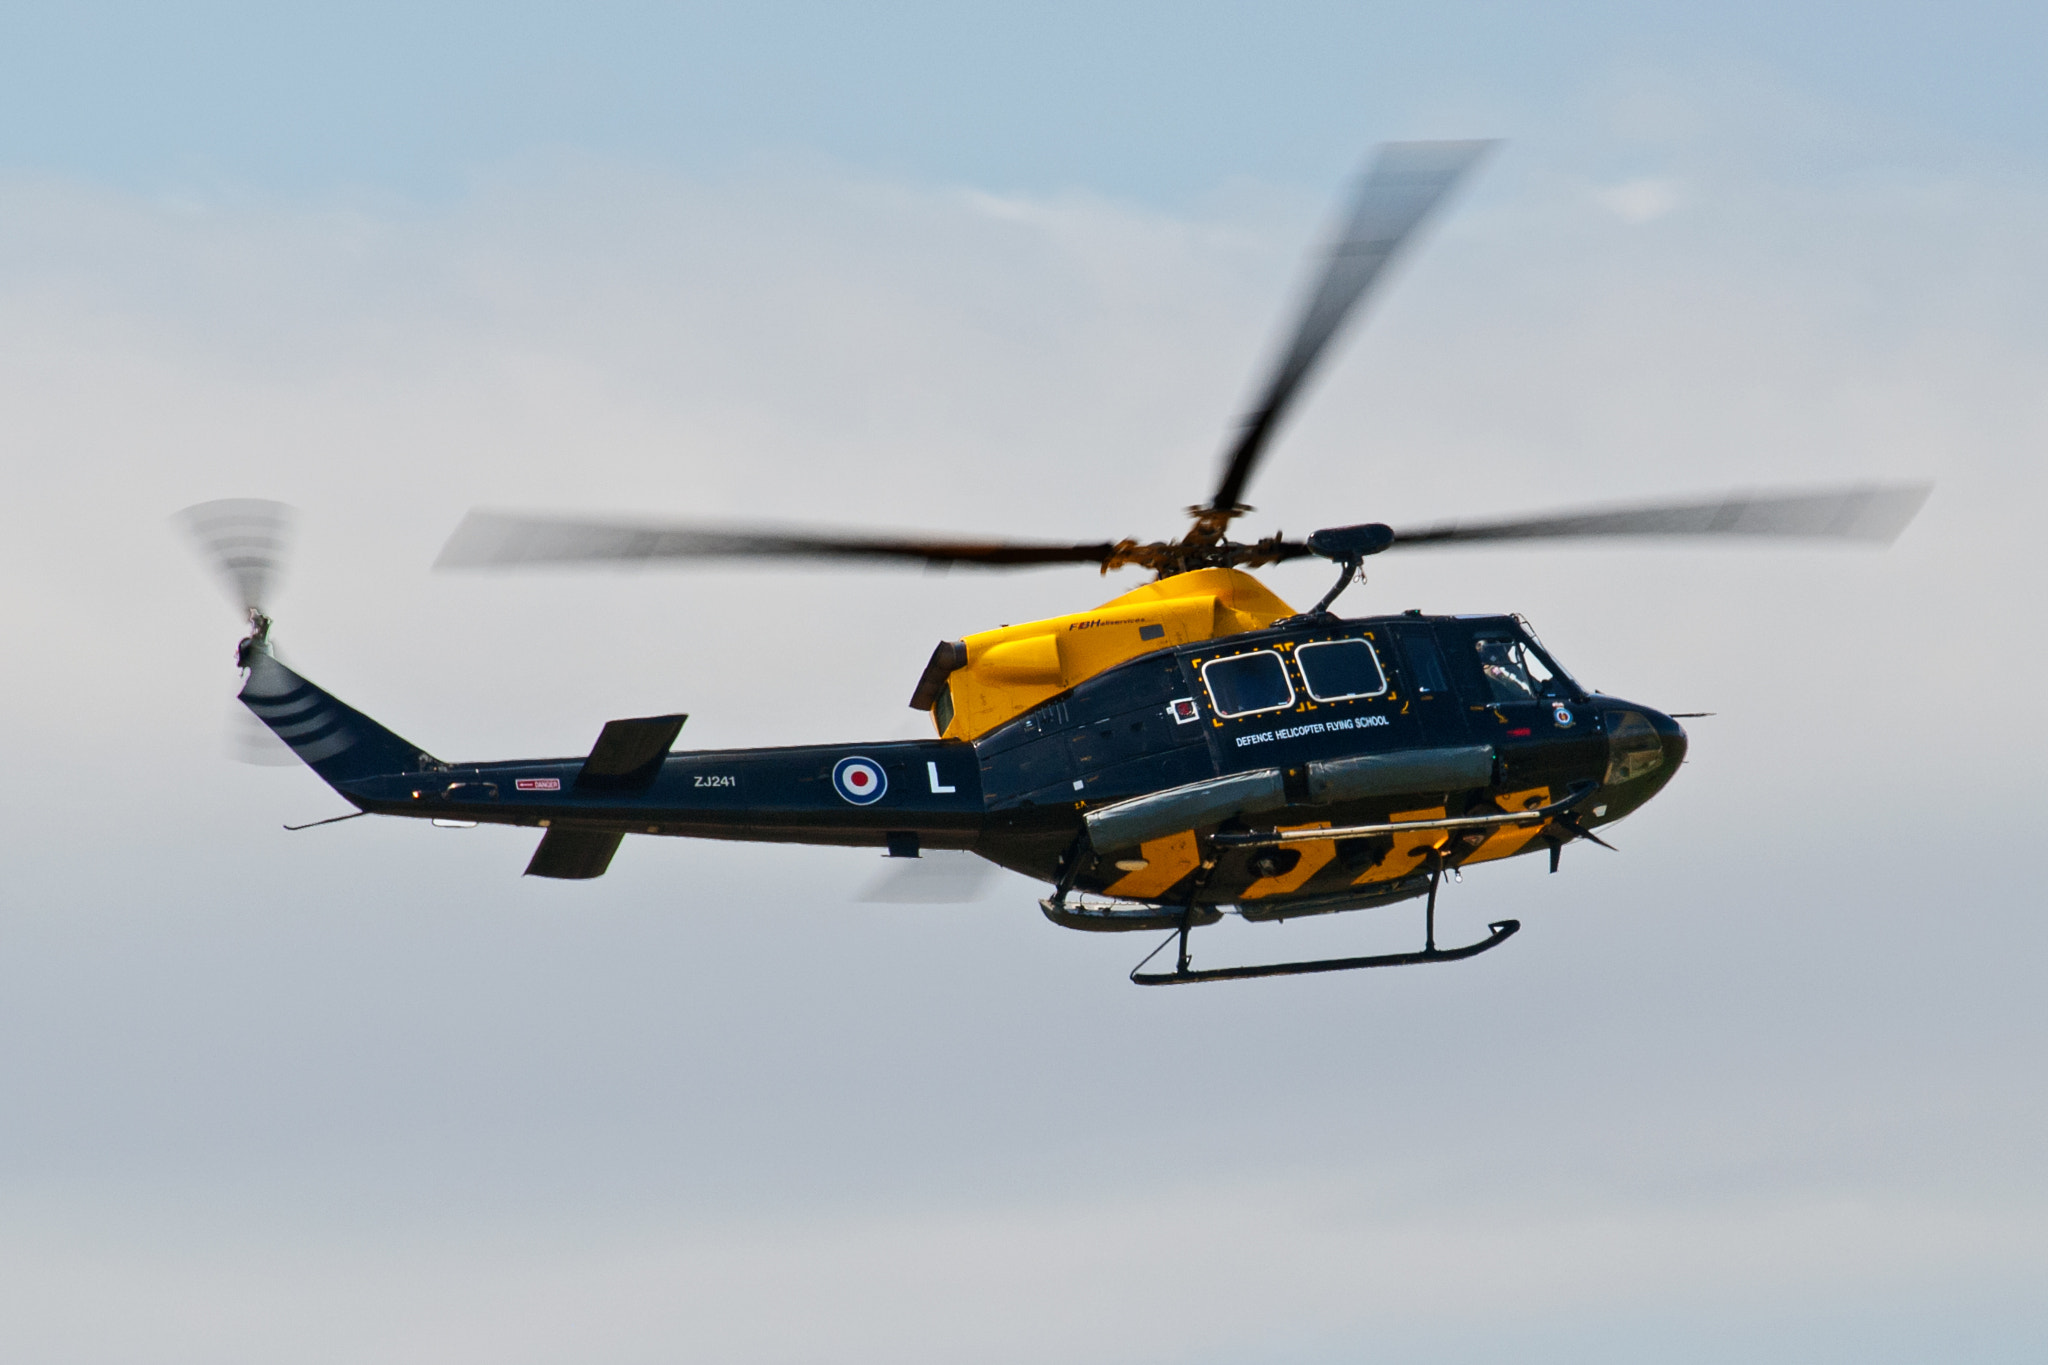 Nikon D200 sample photo. Defense helicopter flying school photography